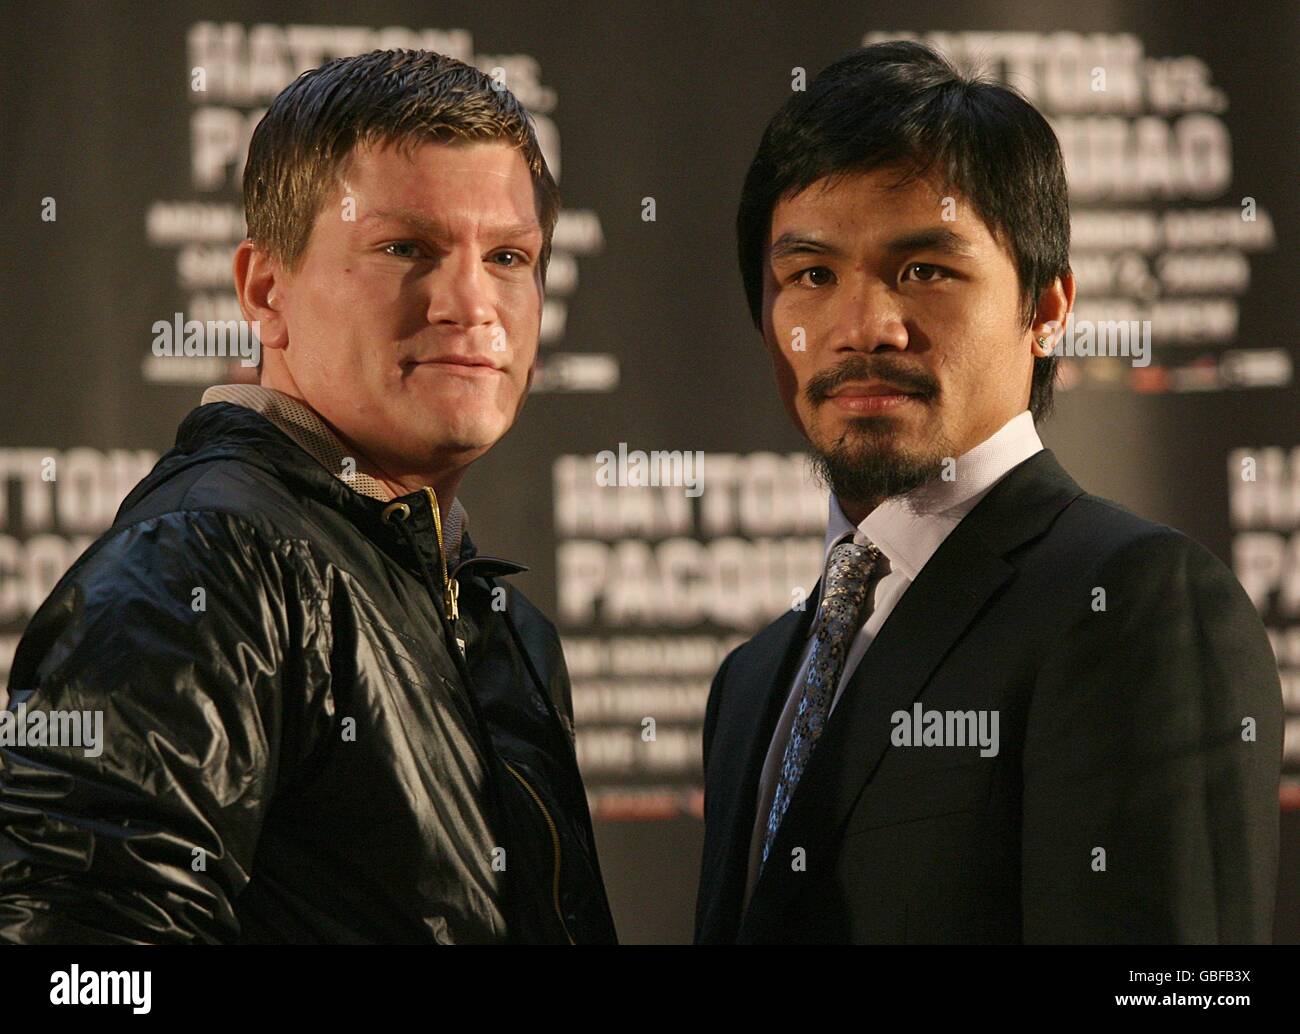 Ricky Hatton (left) and Manny Pacquiao (rigth) during a promotional press event at the Trafford Centre Great Hall in Manchester Stock Photo